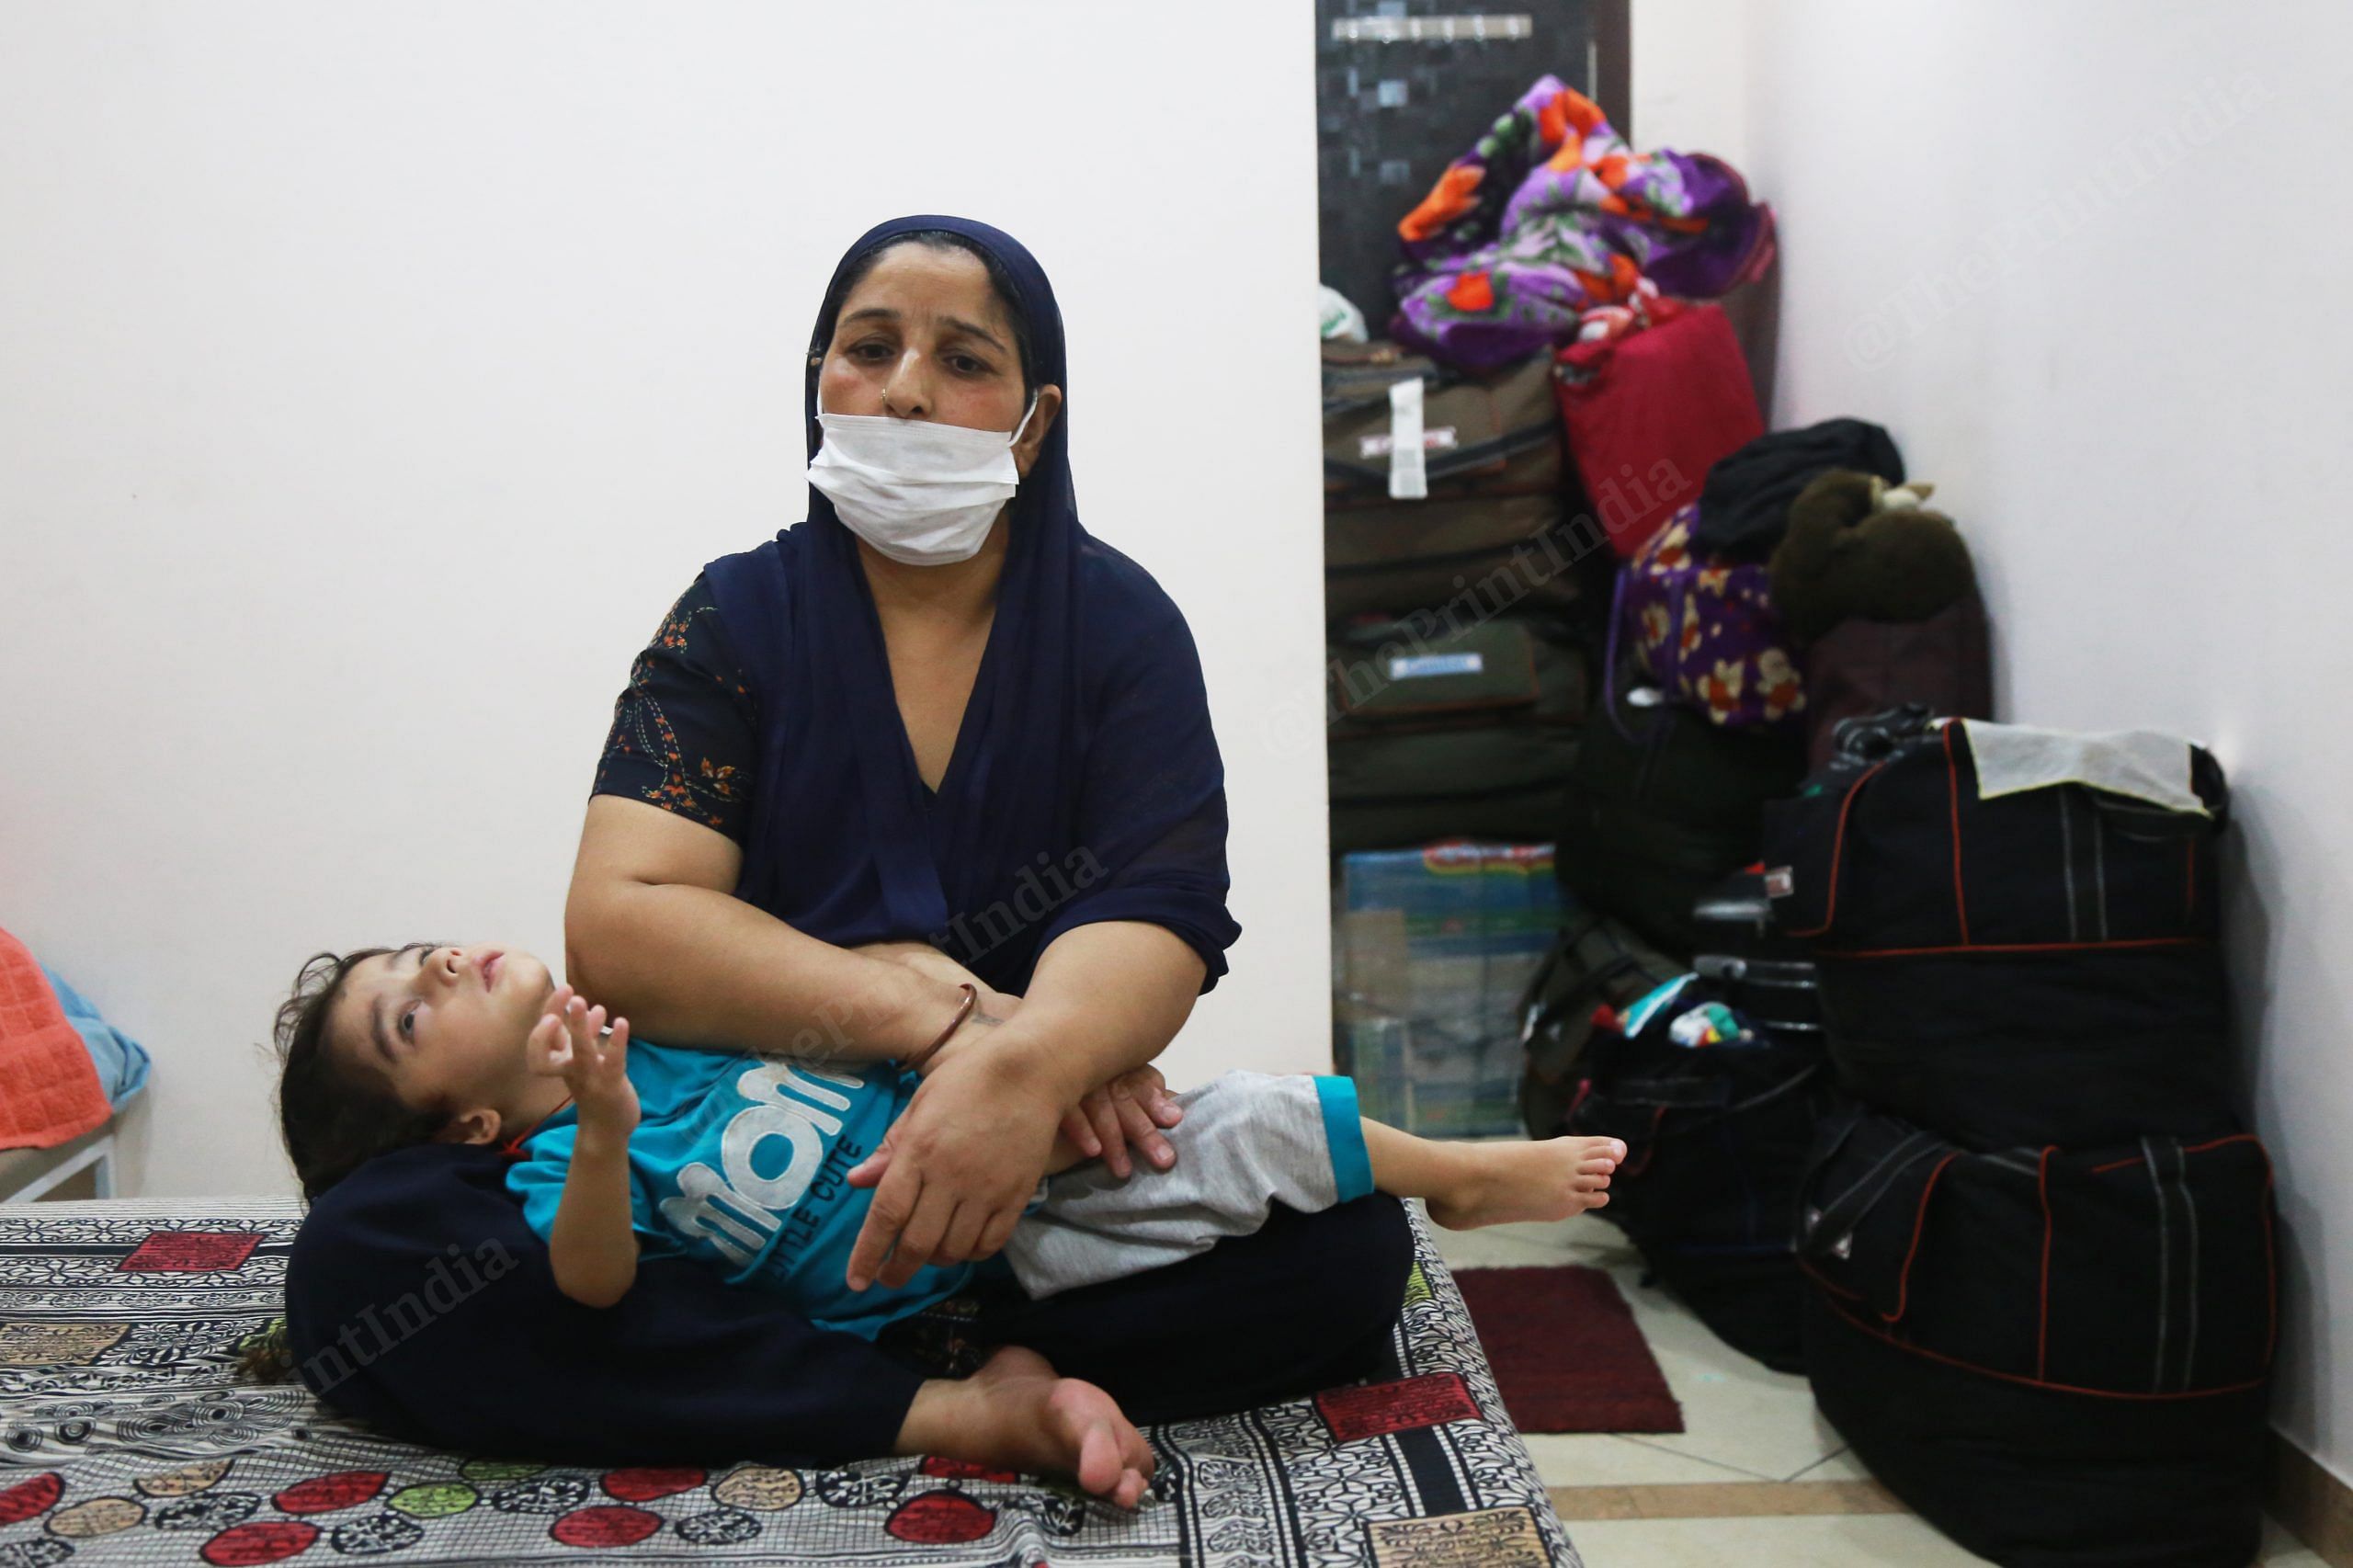 Gorjeet’s mother, Harbansh Kaur, takes care of her grandson. She saw her husband die in the Kabul attack. She said, they had been trying to leave the country for the past five months. They leave behind homes and painstakingly built businesses and shops | Manisha Mondal | ThePrint